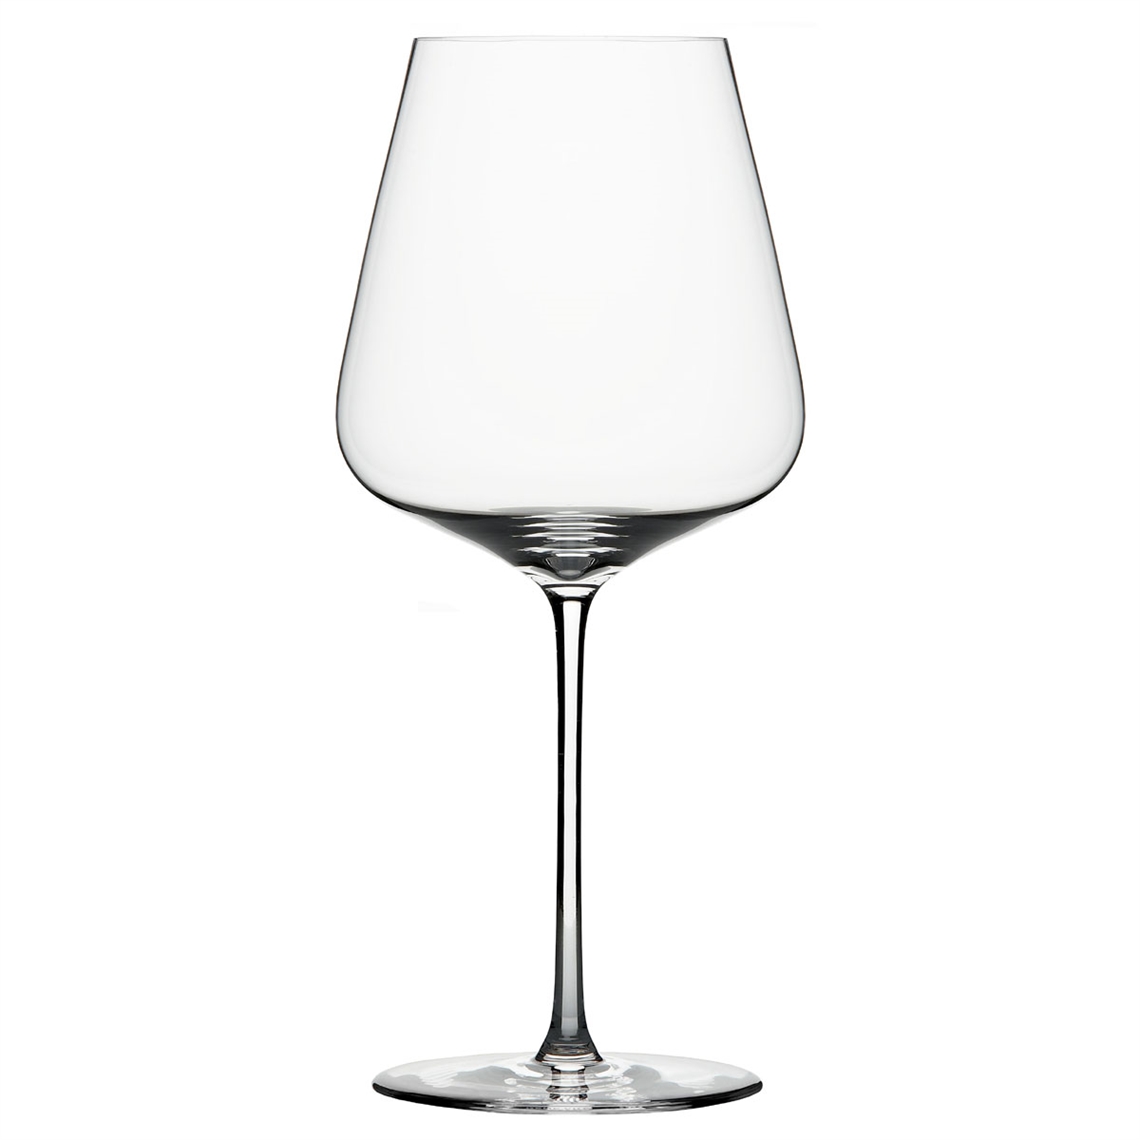 View more beginners guide to different types of wine glasses from our Premium Mouth Blown Glassware range